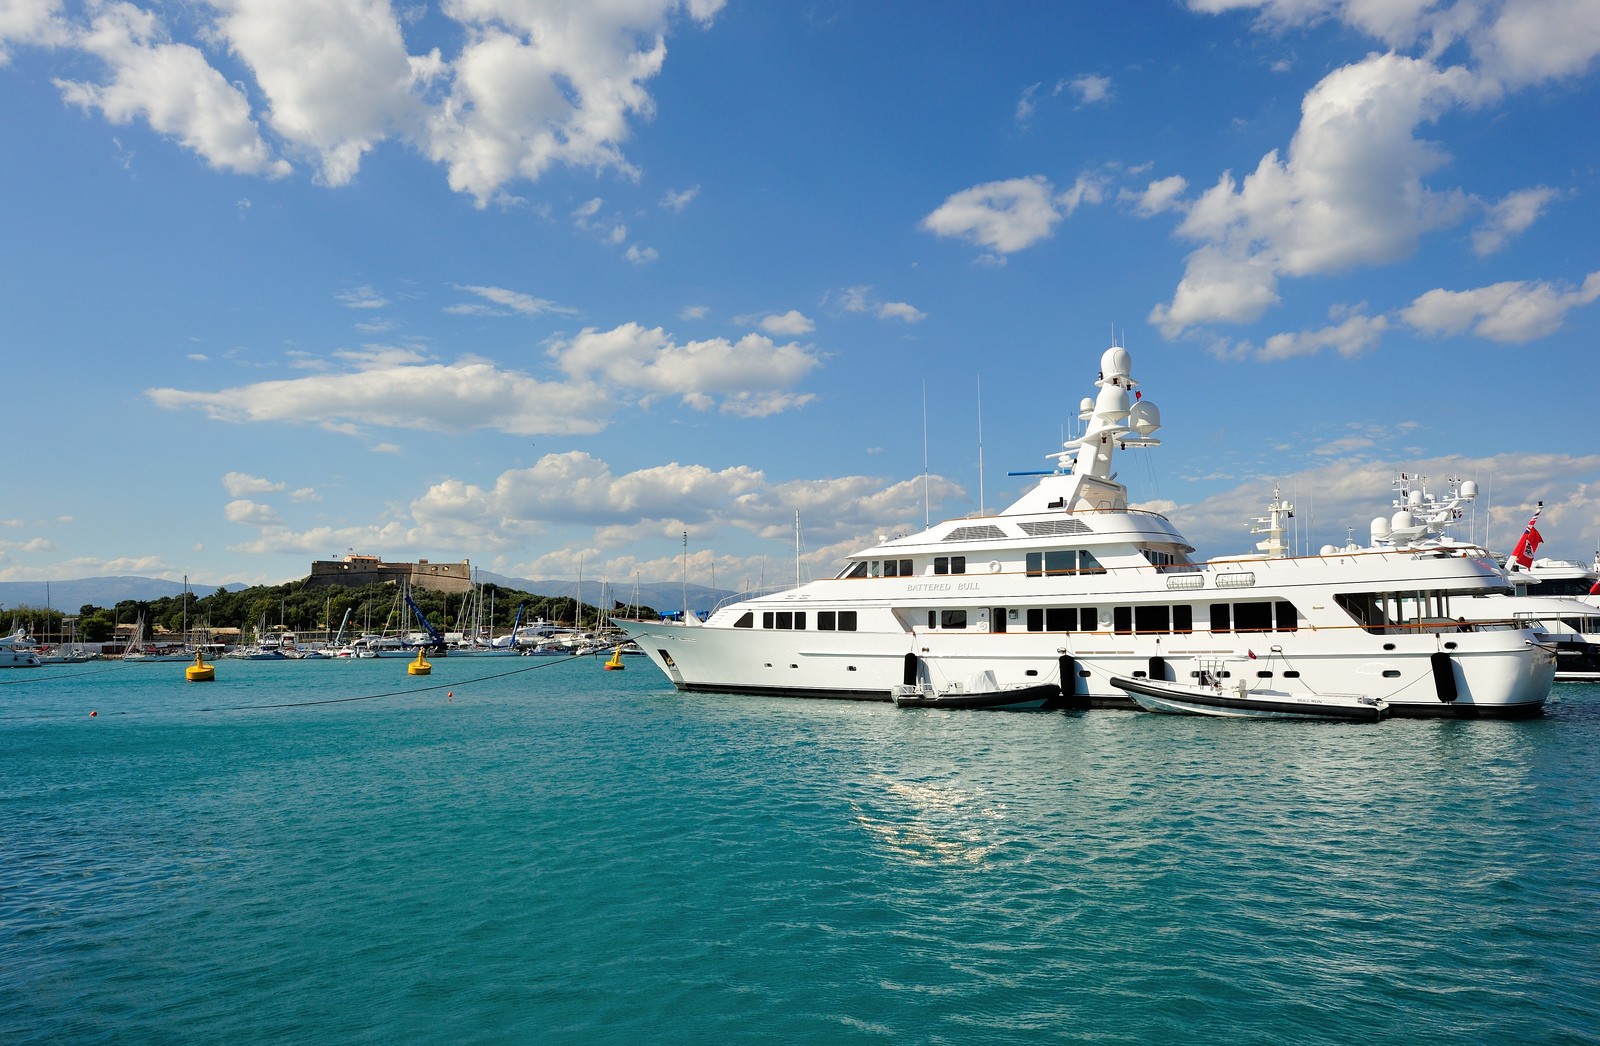 The 52m Yacht MARIA